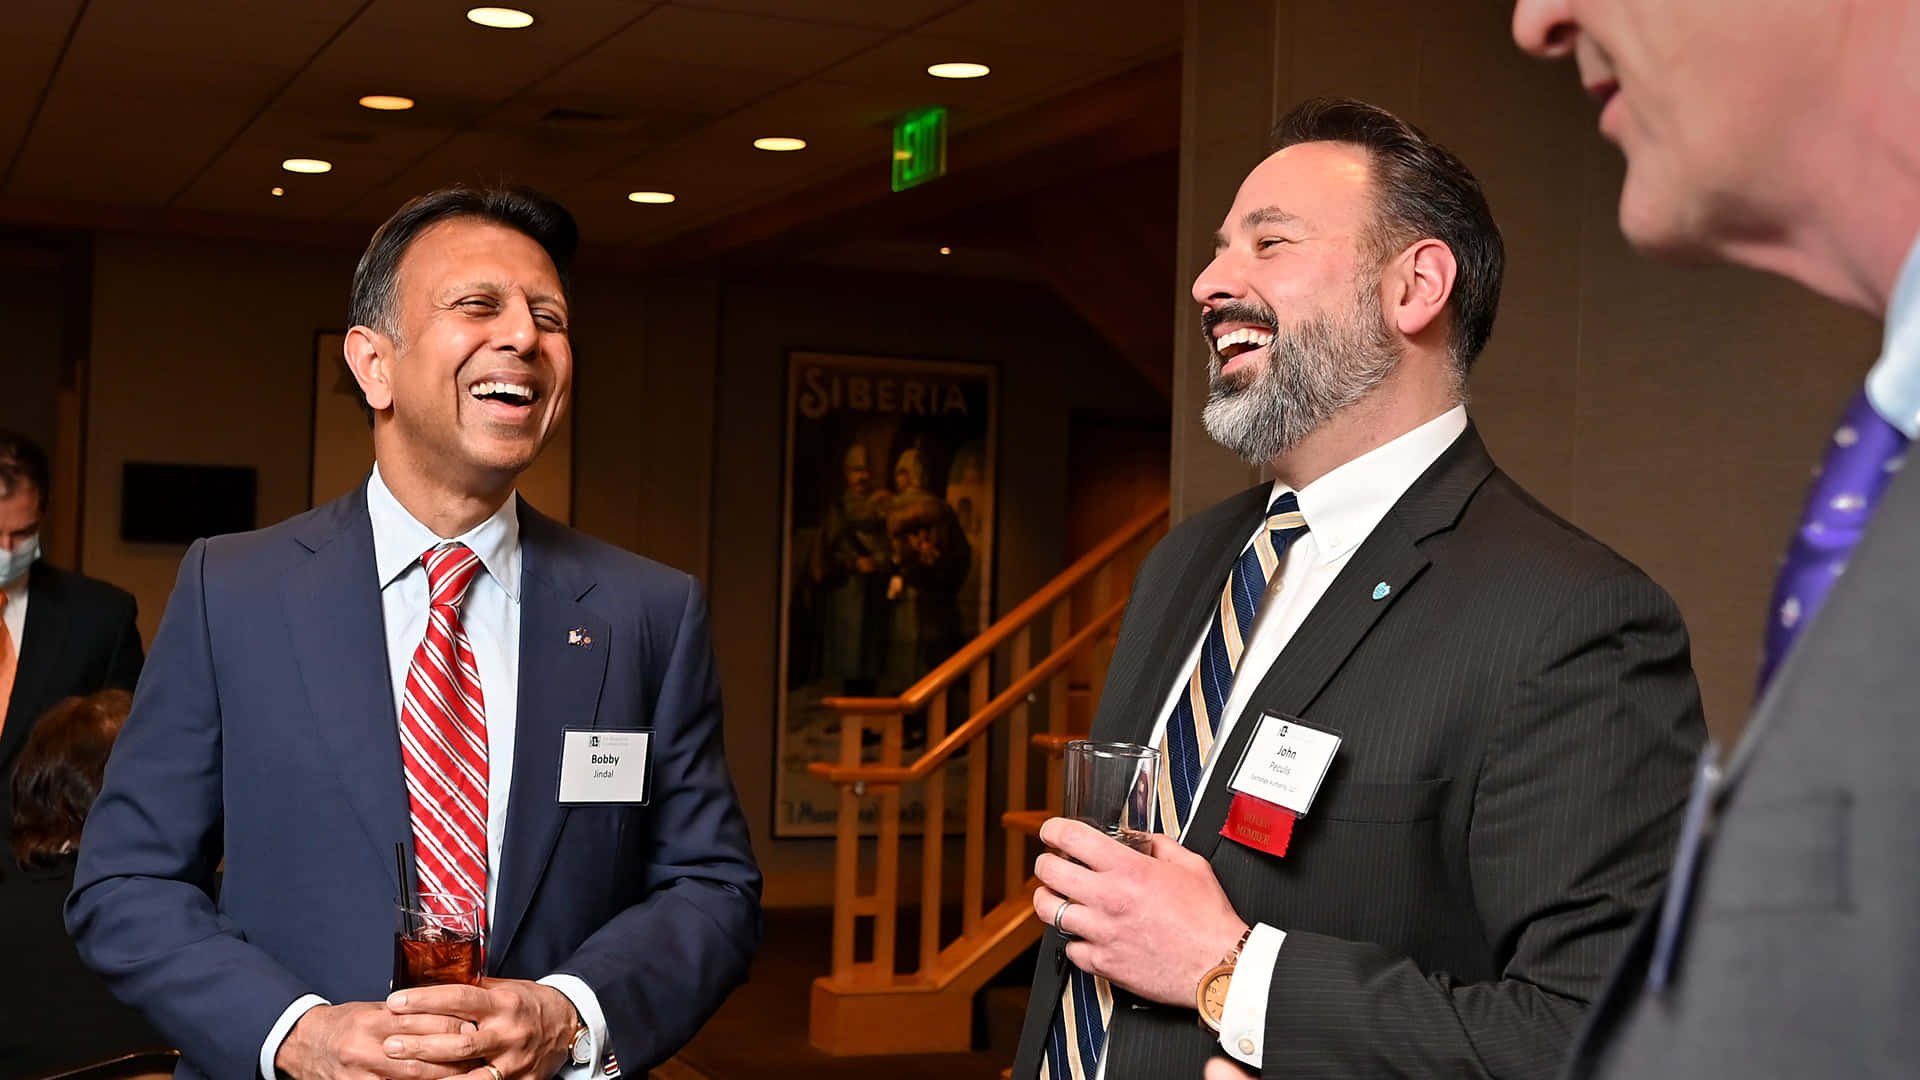 Louisiana Governor Bobby Jindal Sharing a Laugh with Other Governors Wallpaper